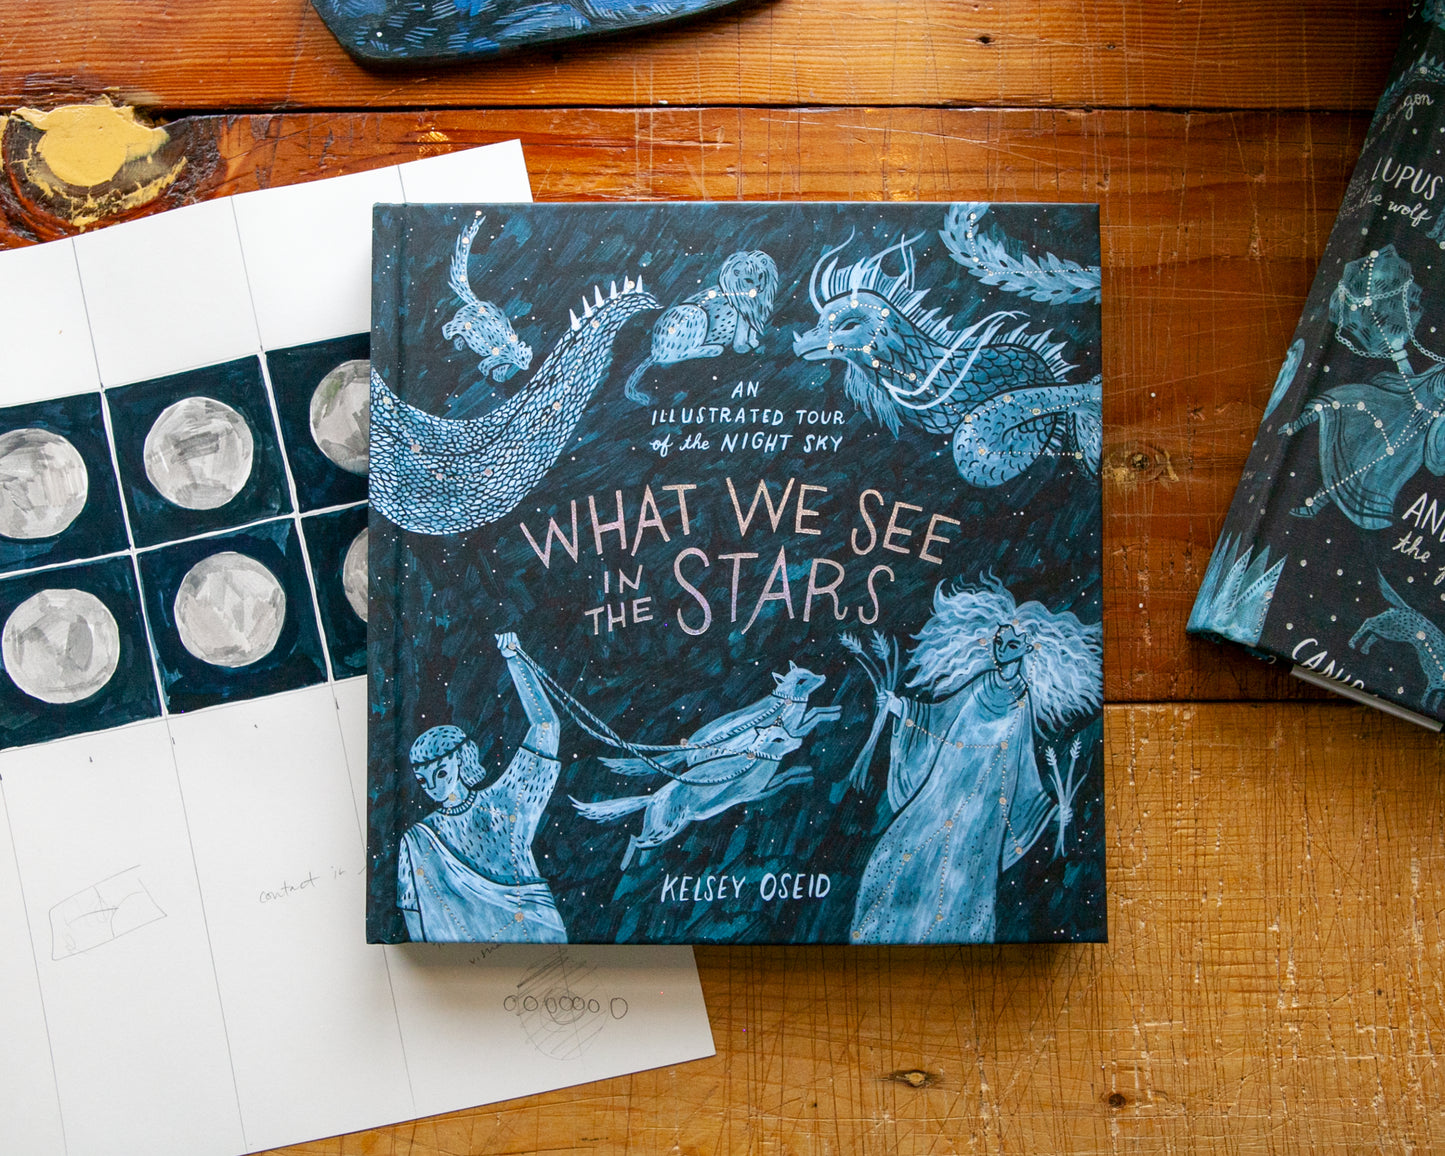 What We See in the Stars (signed copy)